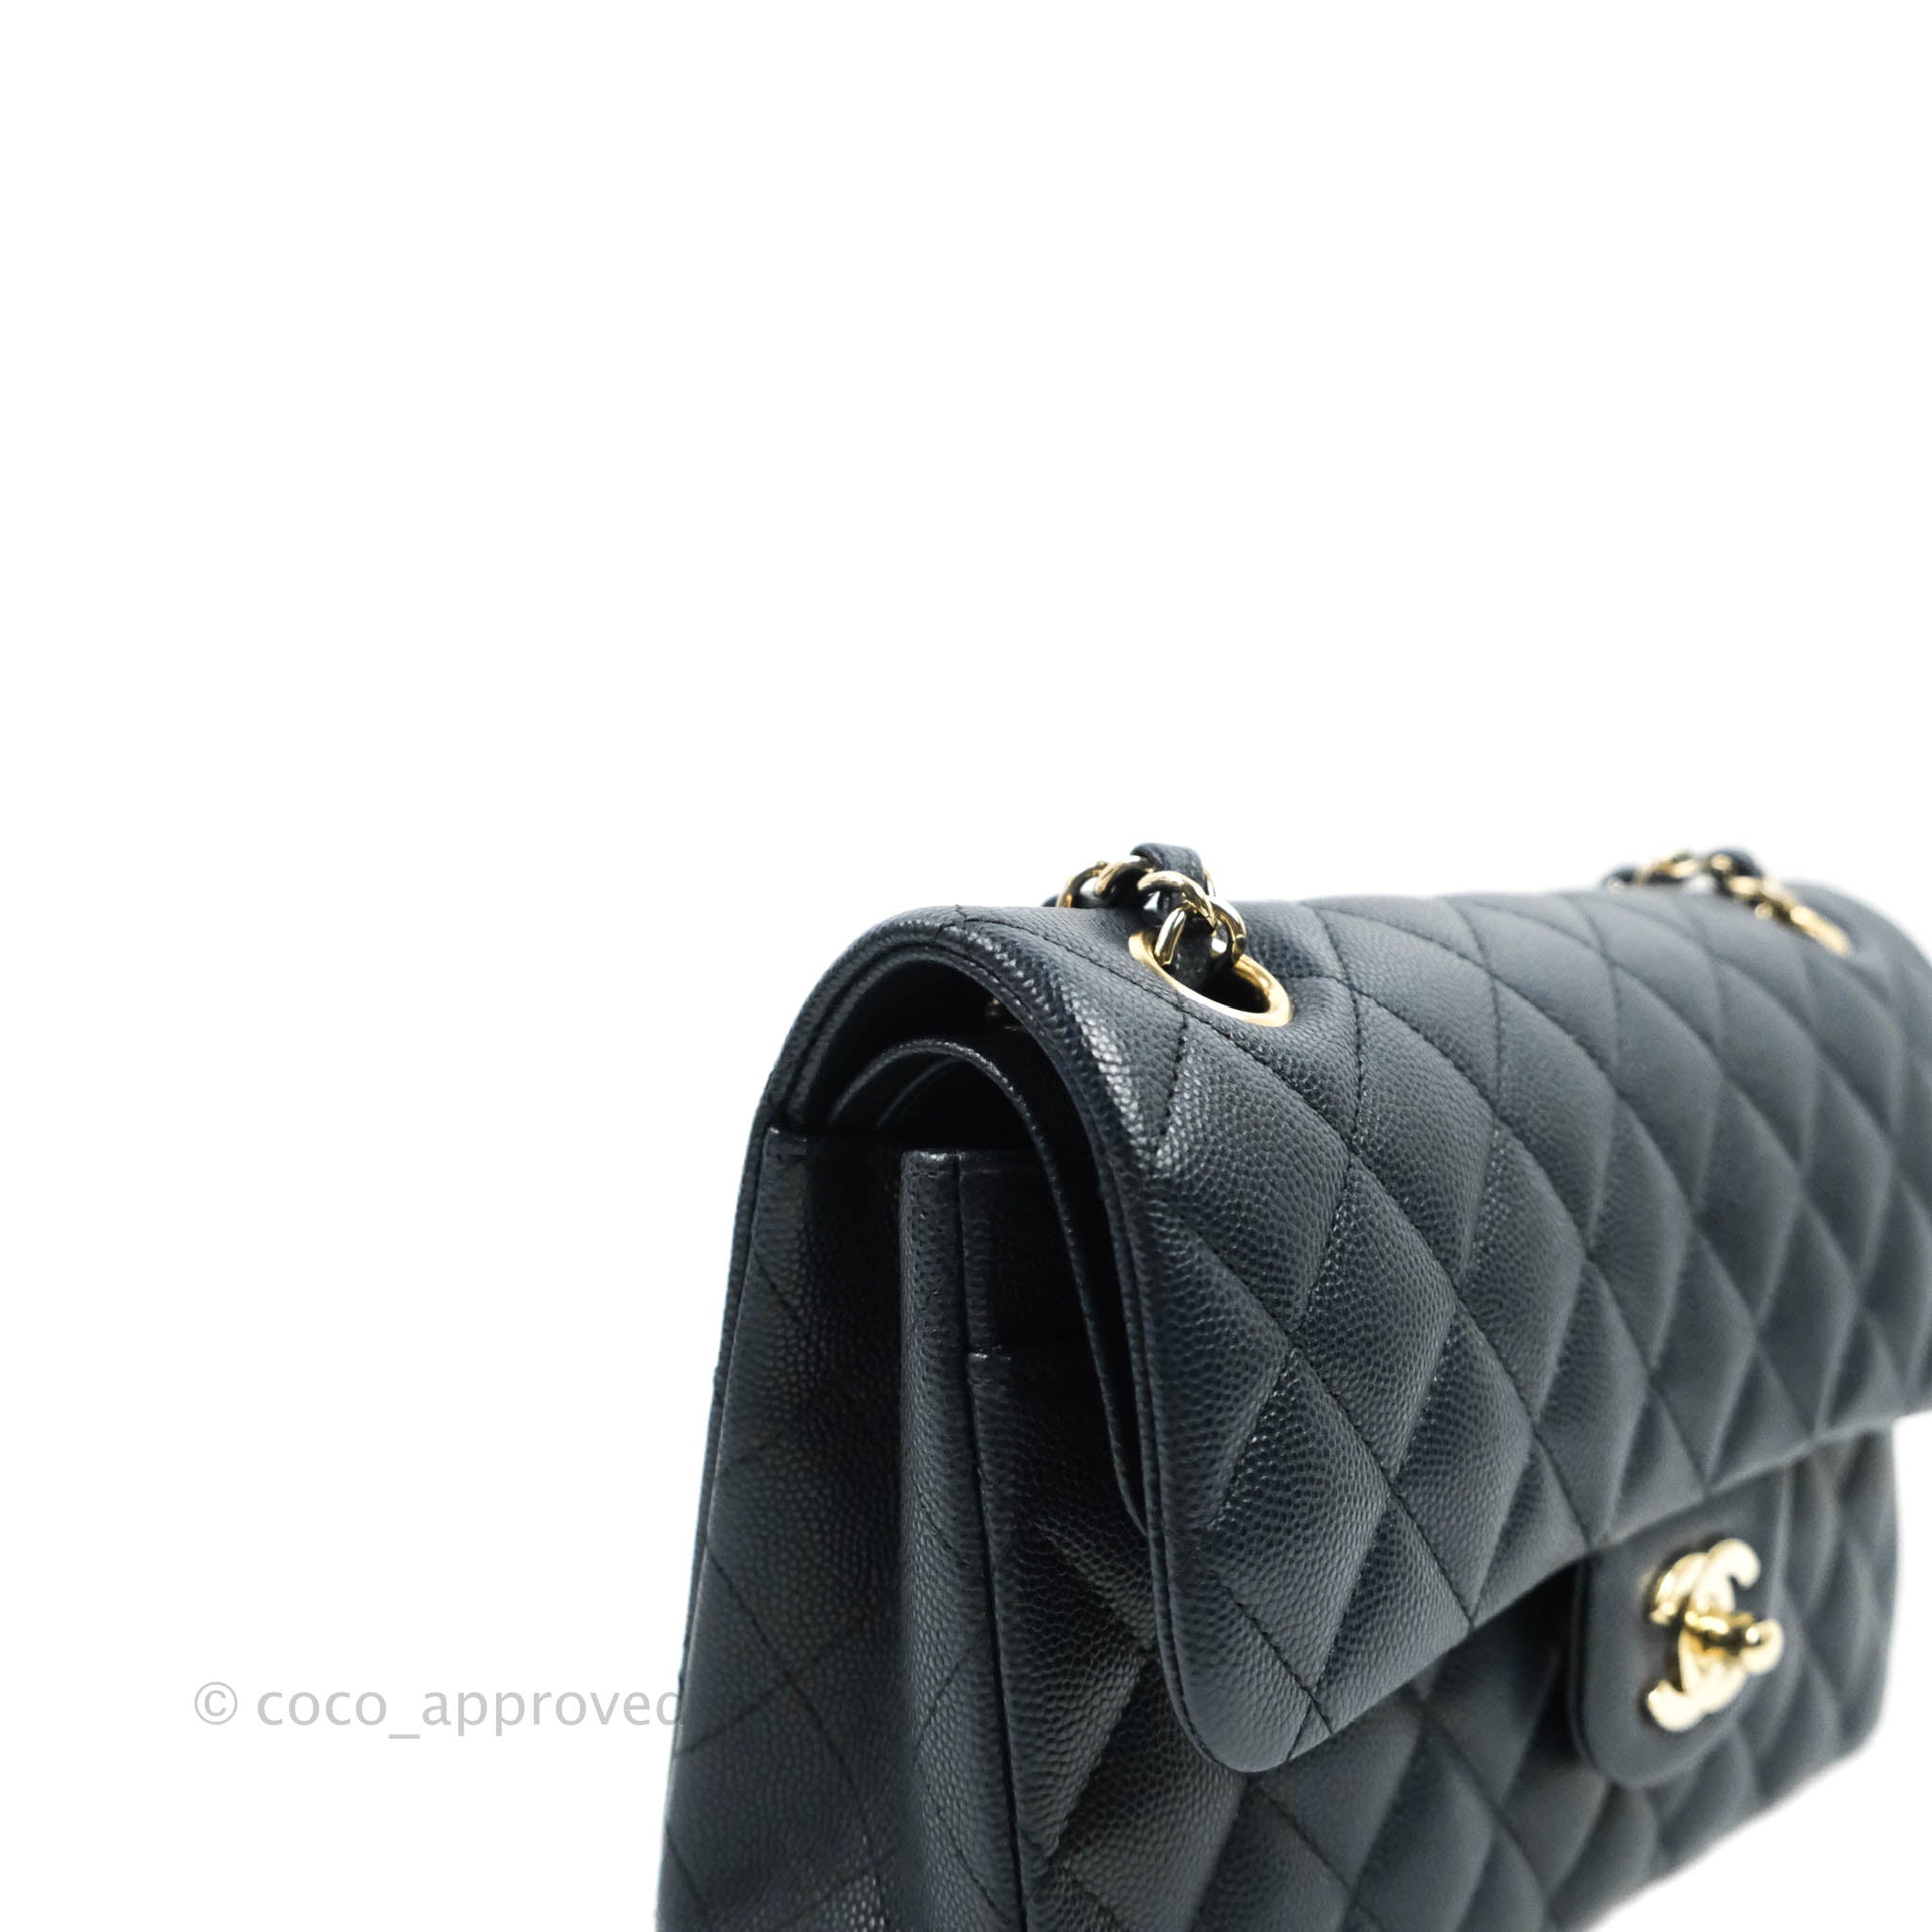 Chanel 2021 Cruise Navy Terry Square Cloth Flap Bags · INTO